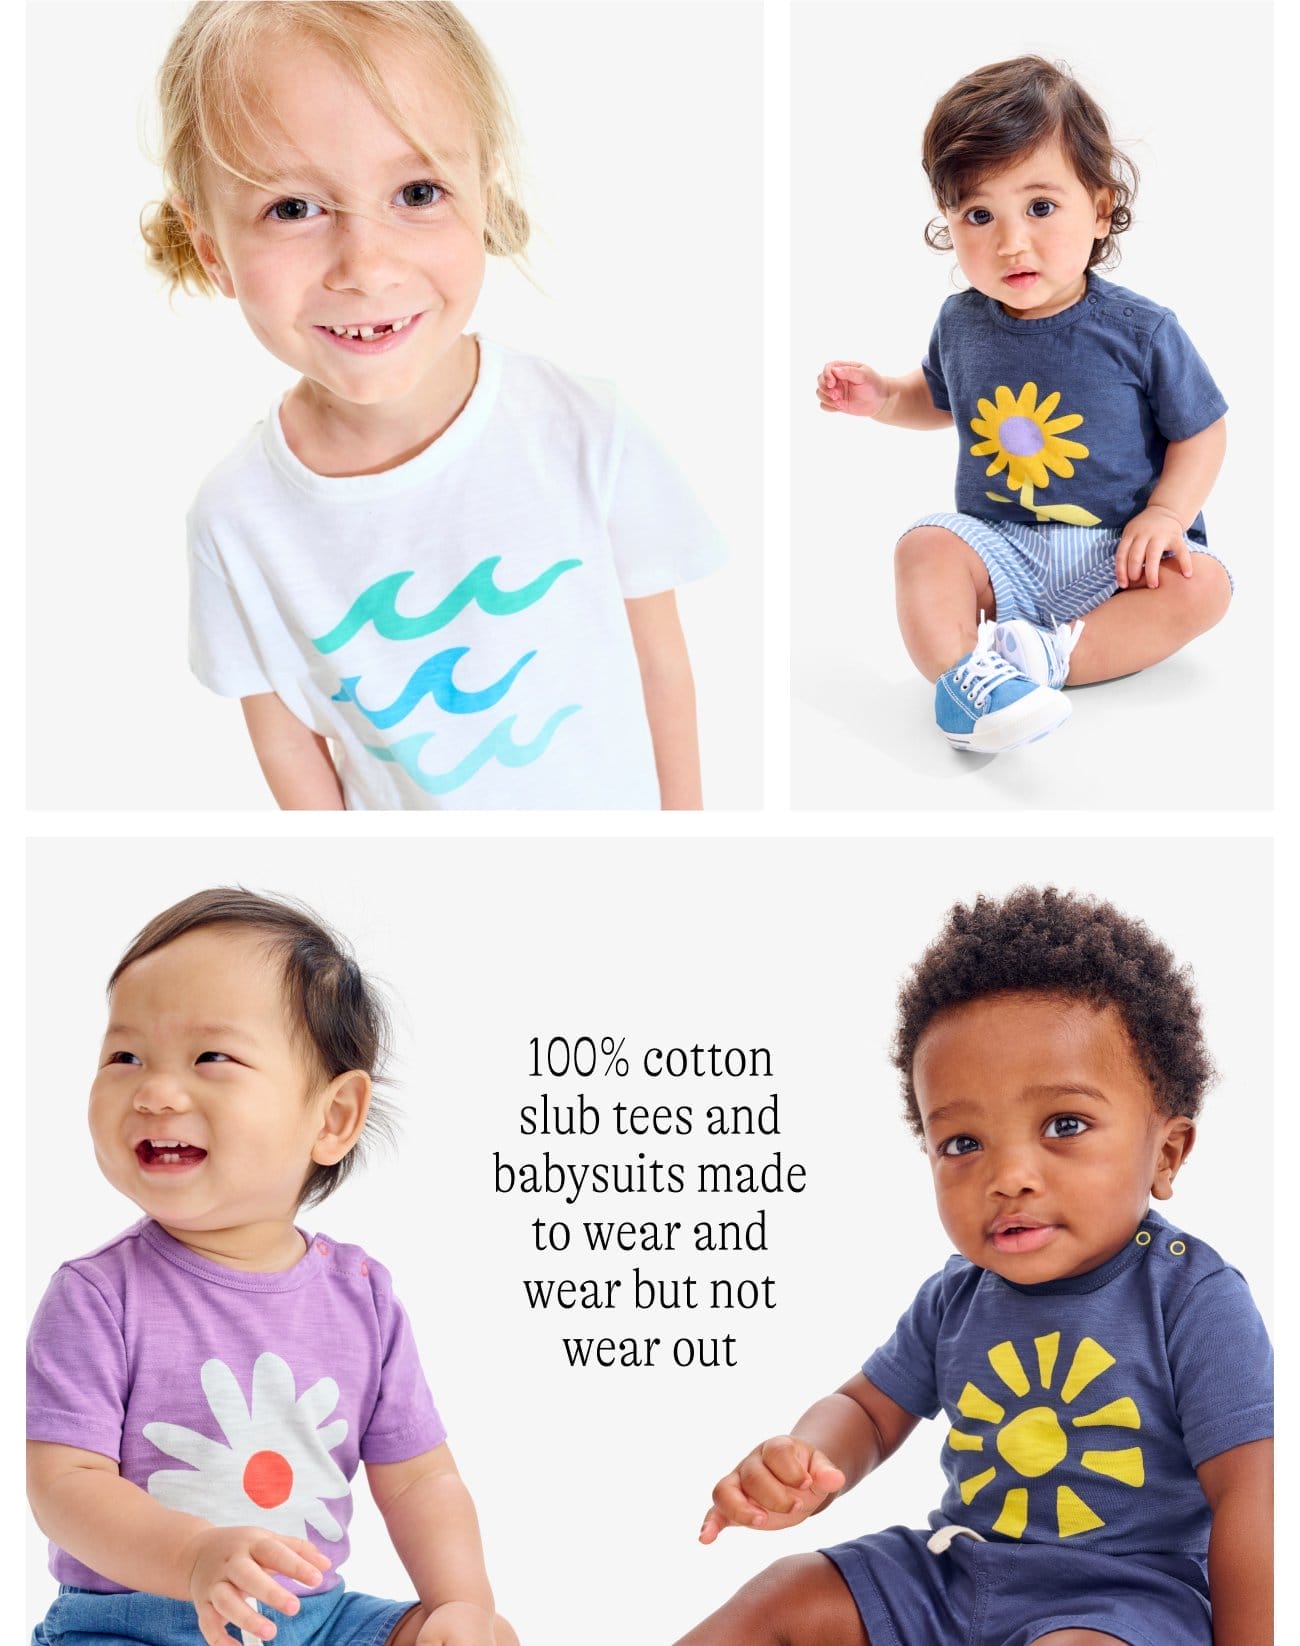 100% cotton slub tees and babysuits made to wear and wear but not wear out